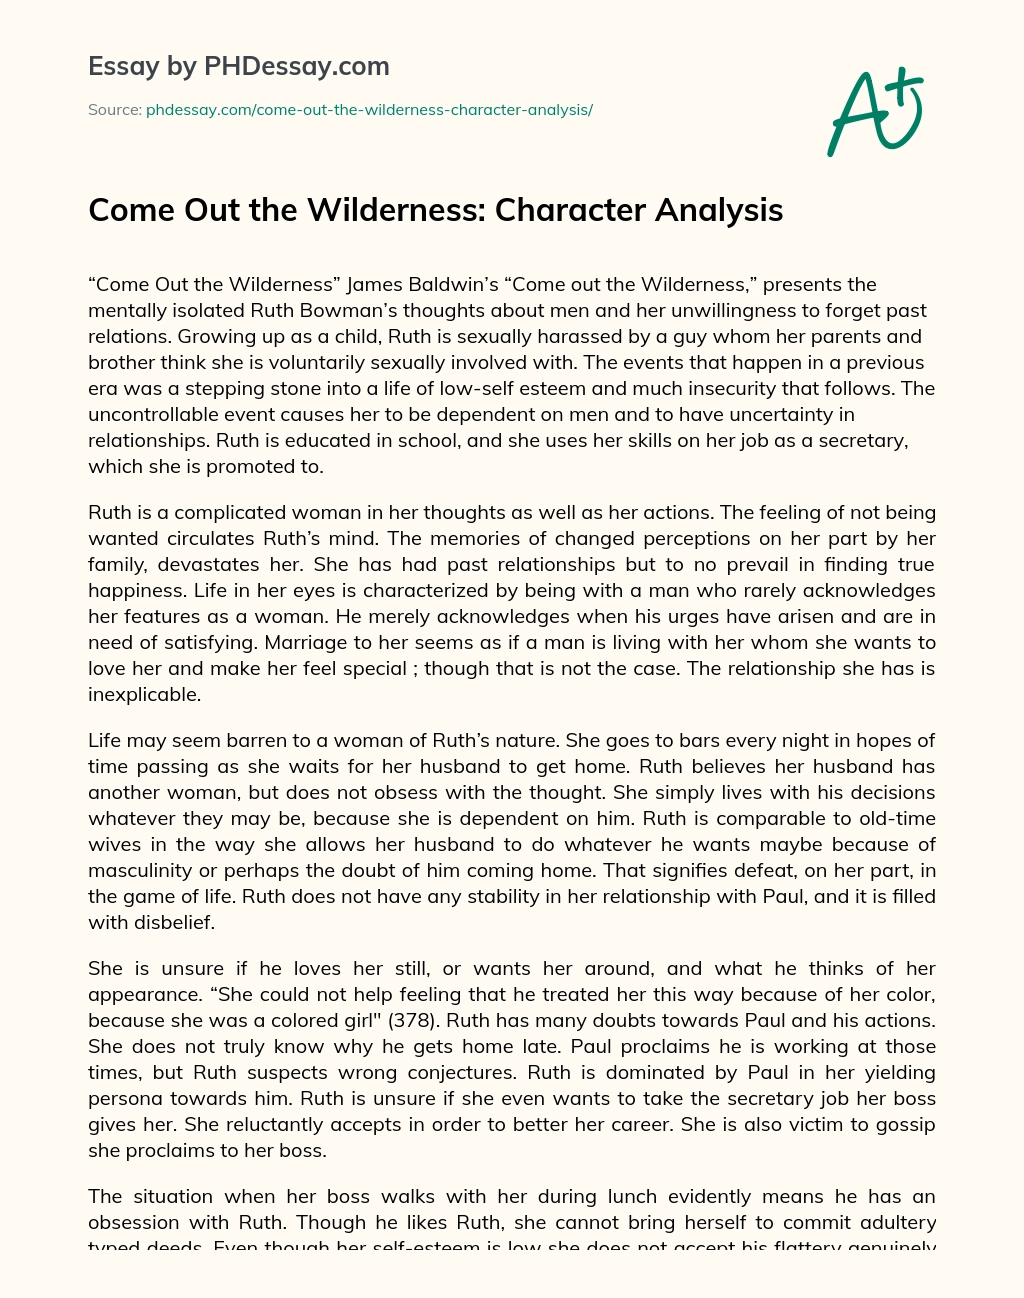 Come Out the Wilderness: Character Analysis essay